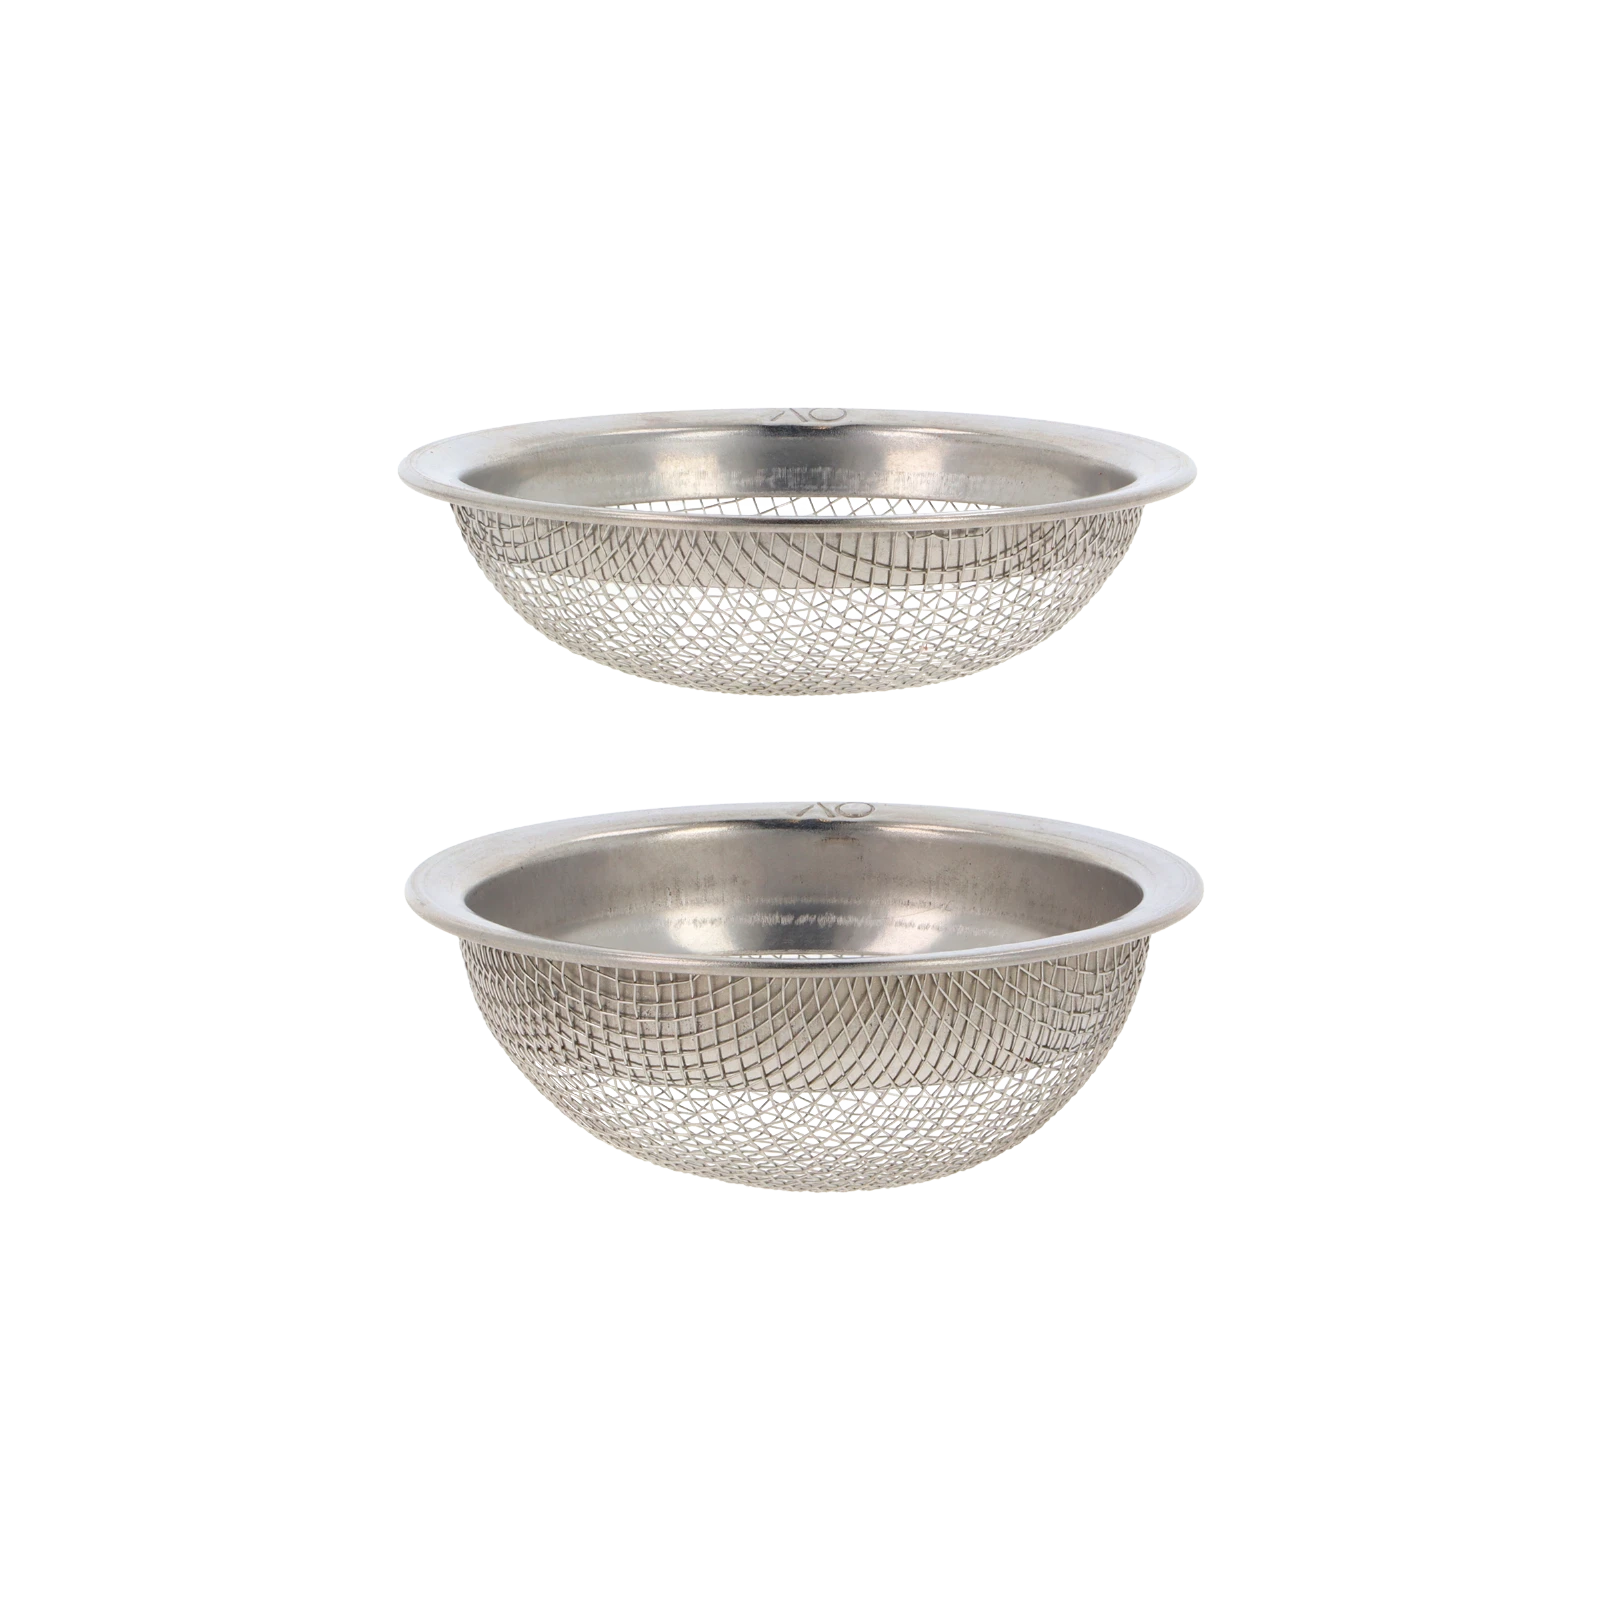 AO -Bowl Strainer - Pro - Duo Pack - Set - 16 + 22 mm